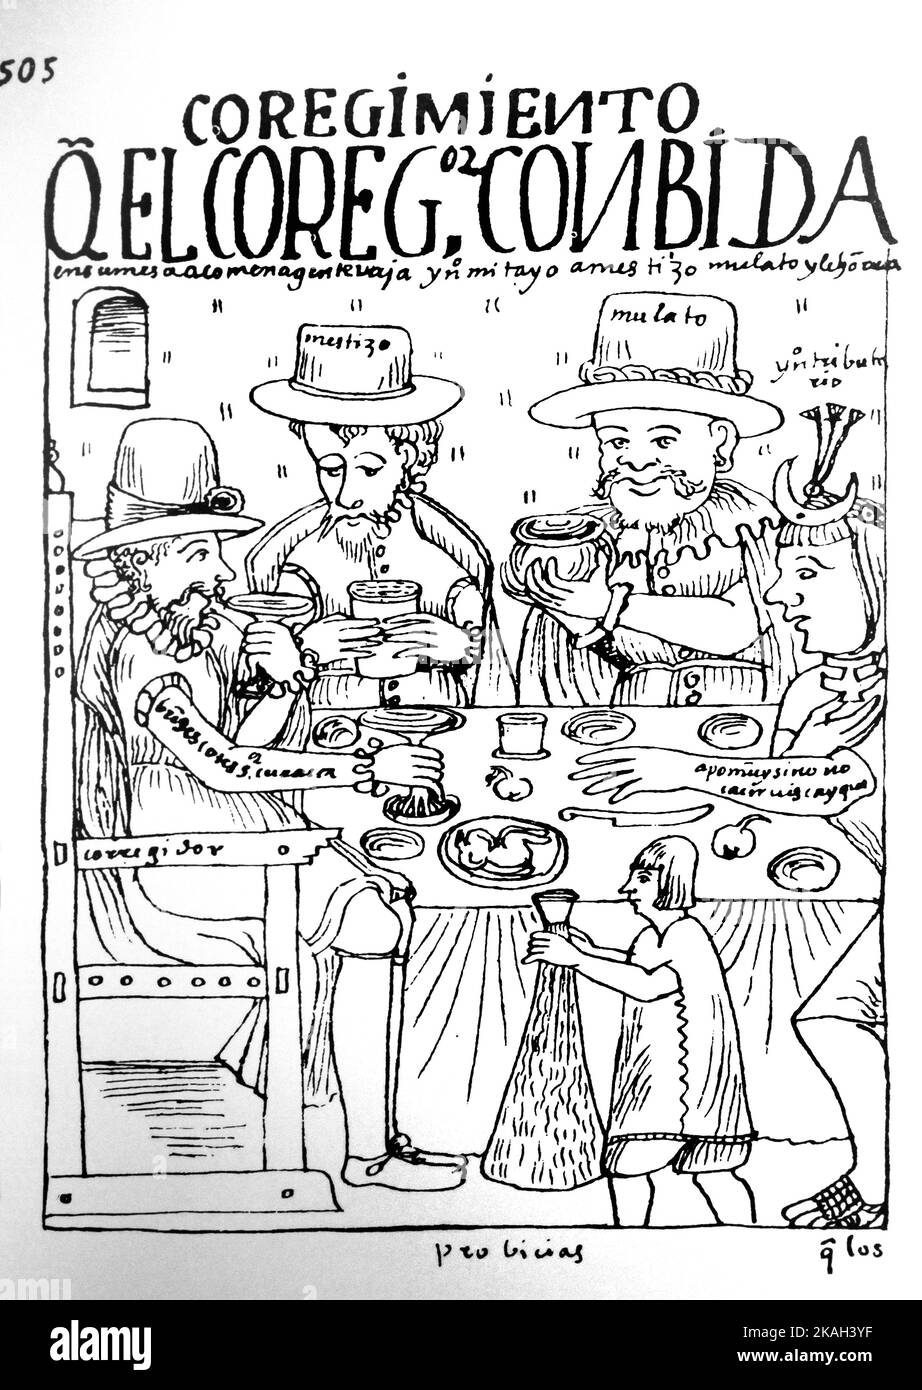 505.The royal administrator and his low-status dinner guests;the mestizo,the mulatto,and the tributary Indian.by Felipe Guamán Poma de Ayala (1535- 1616) Guamán Poma tells the story how spain built the most extensive colonial empire in the 'New World'' and conquest from an Andean perspective,in particular the ill-treatment of the natives of the Andes by the Spaniards,called the Nueva corónica y buen gobierno. Stock Photo